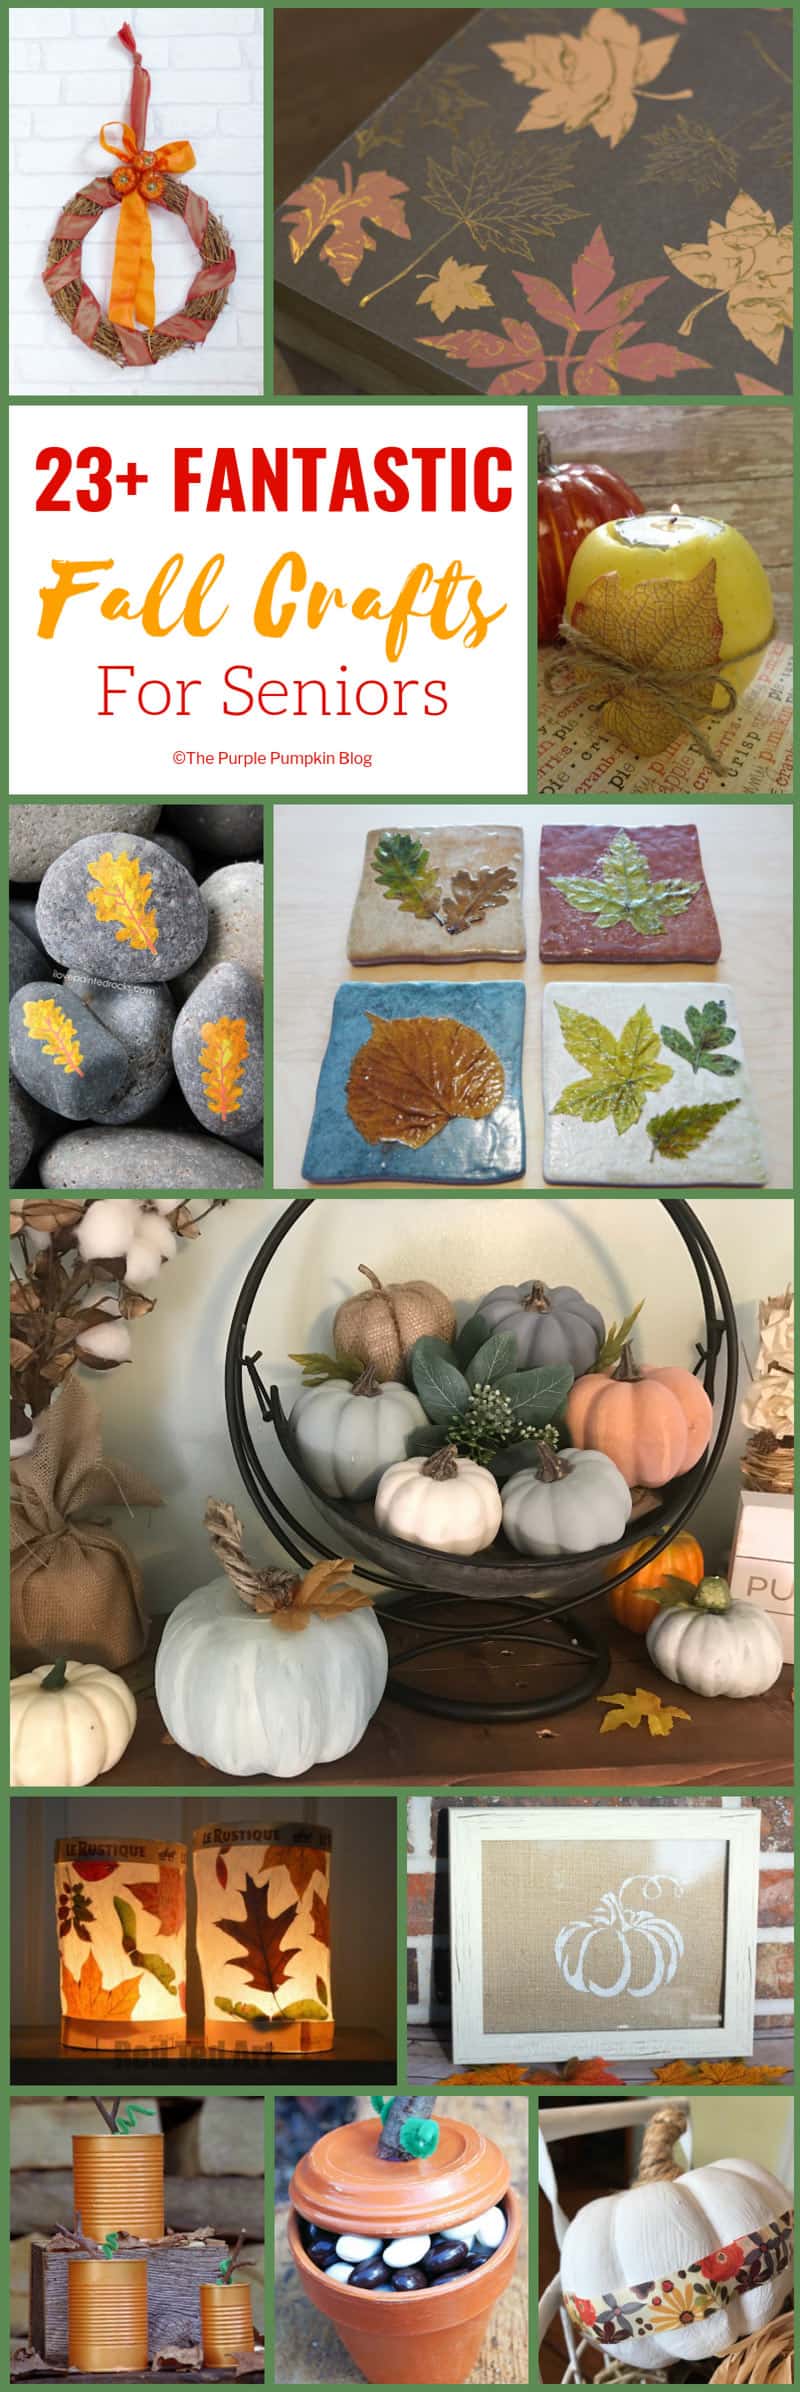 23+ Fantastic Fall Crafts for Seniors - includes fun autumn crafts like decoupage, wreath making, paper crafts, rock painting,nature crafts and more.